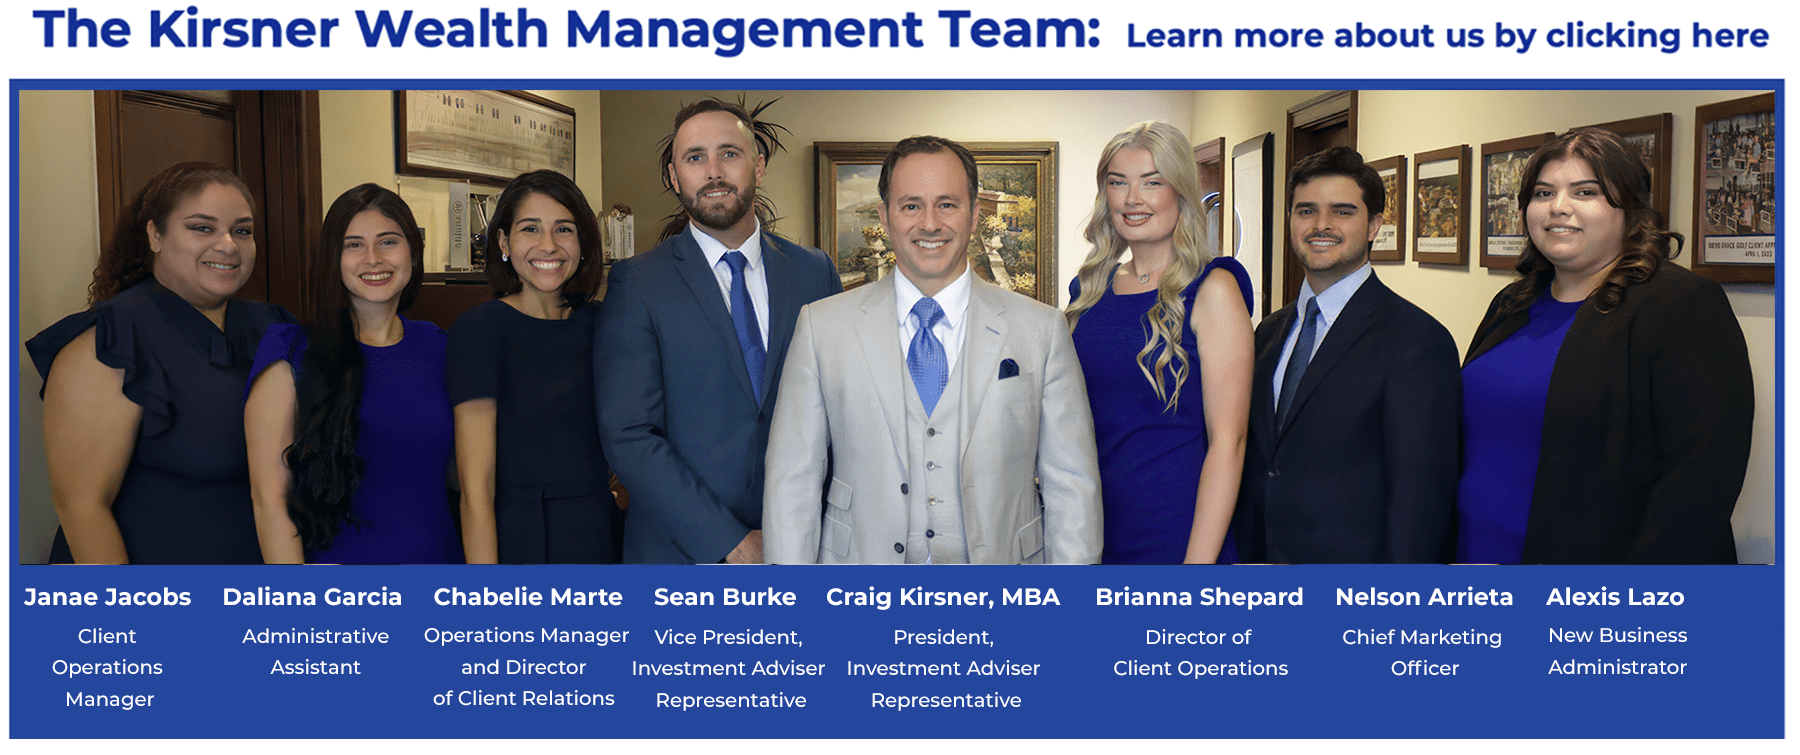 The Kirsner Wealth Management Team: Learn More about us by clicking here. Listed from left to right: Janae Jacobs: Client Operations Manager, Daliana Garcia: Administrative Assistant, Chabelie Martie: Operations Manager and Director of Client Relations, Sean Burke: Vice President, Investment Adviser Representative, Craig Kirnser, MBA: President, Investment Adviser Representative, Brianna Shepard: Director of Client Operations, Nelson Arrieta: Chief Marketing Officer, Alexis Lazo: New Business Administrator